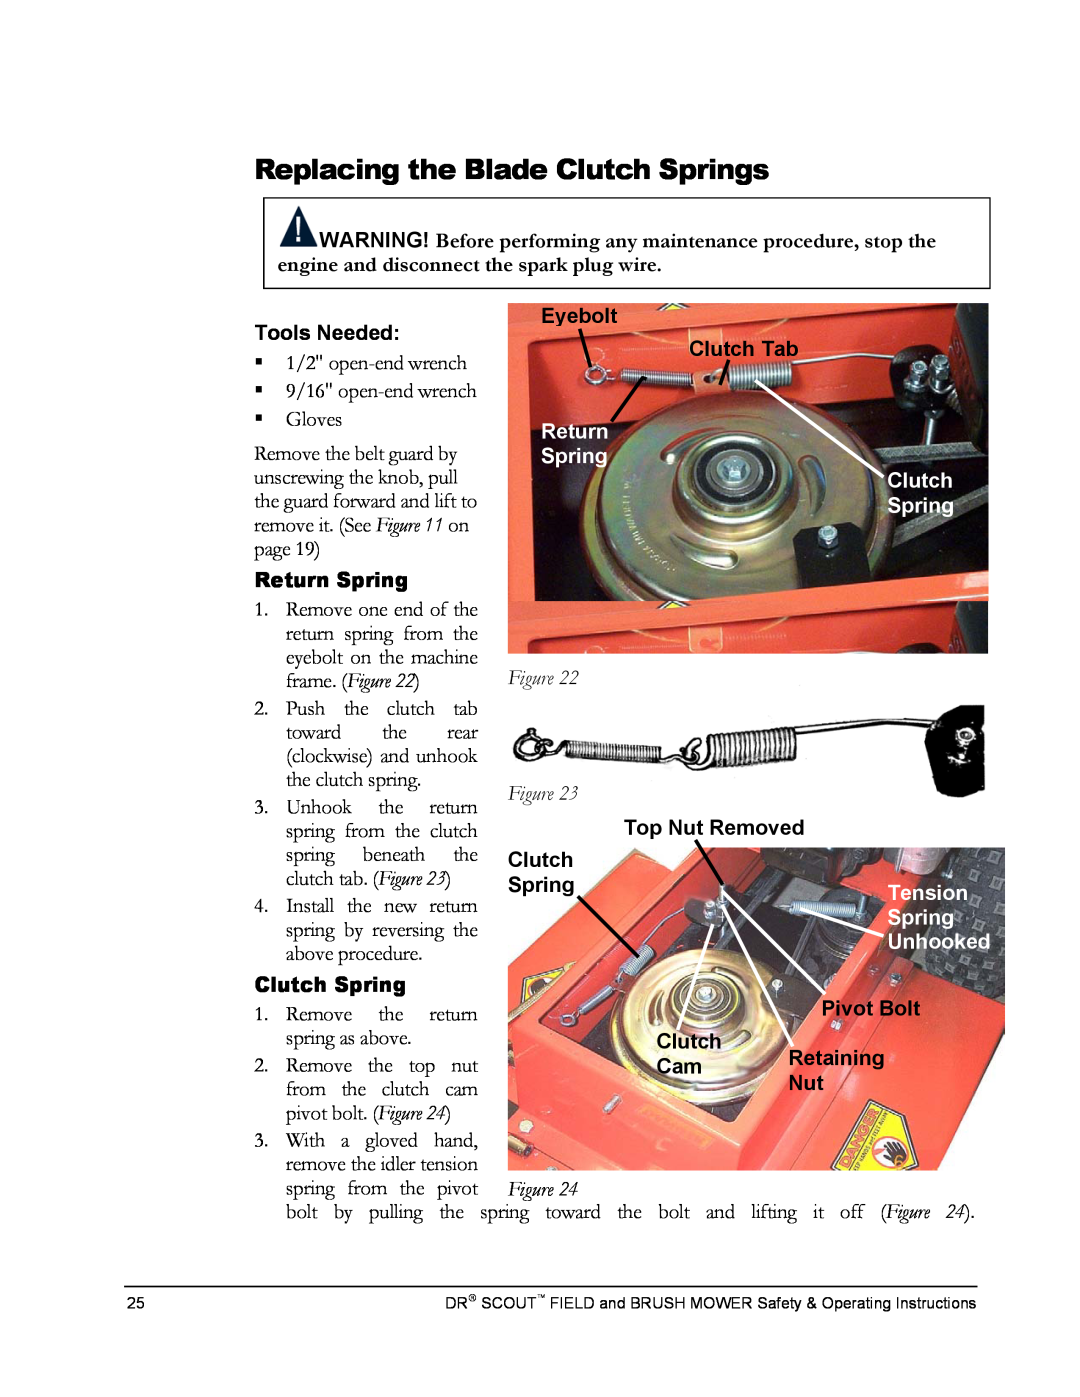 Country Home Products DR SCOUT FIELD and BRUSH MOWER manual Replacing the Blade Clutch Springs, Return Spring, Tension 